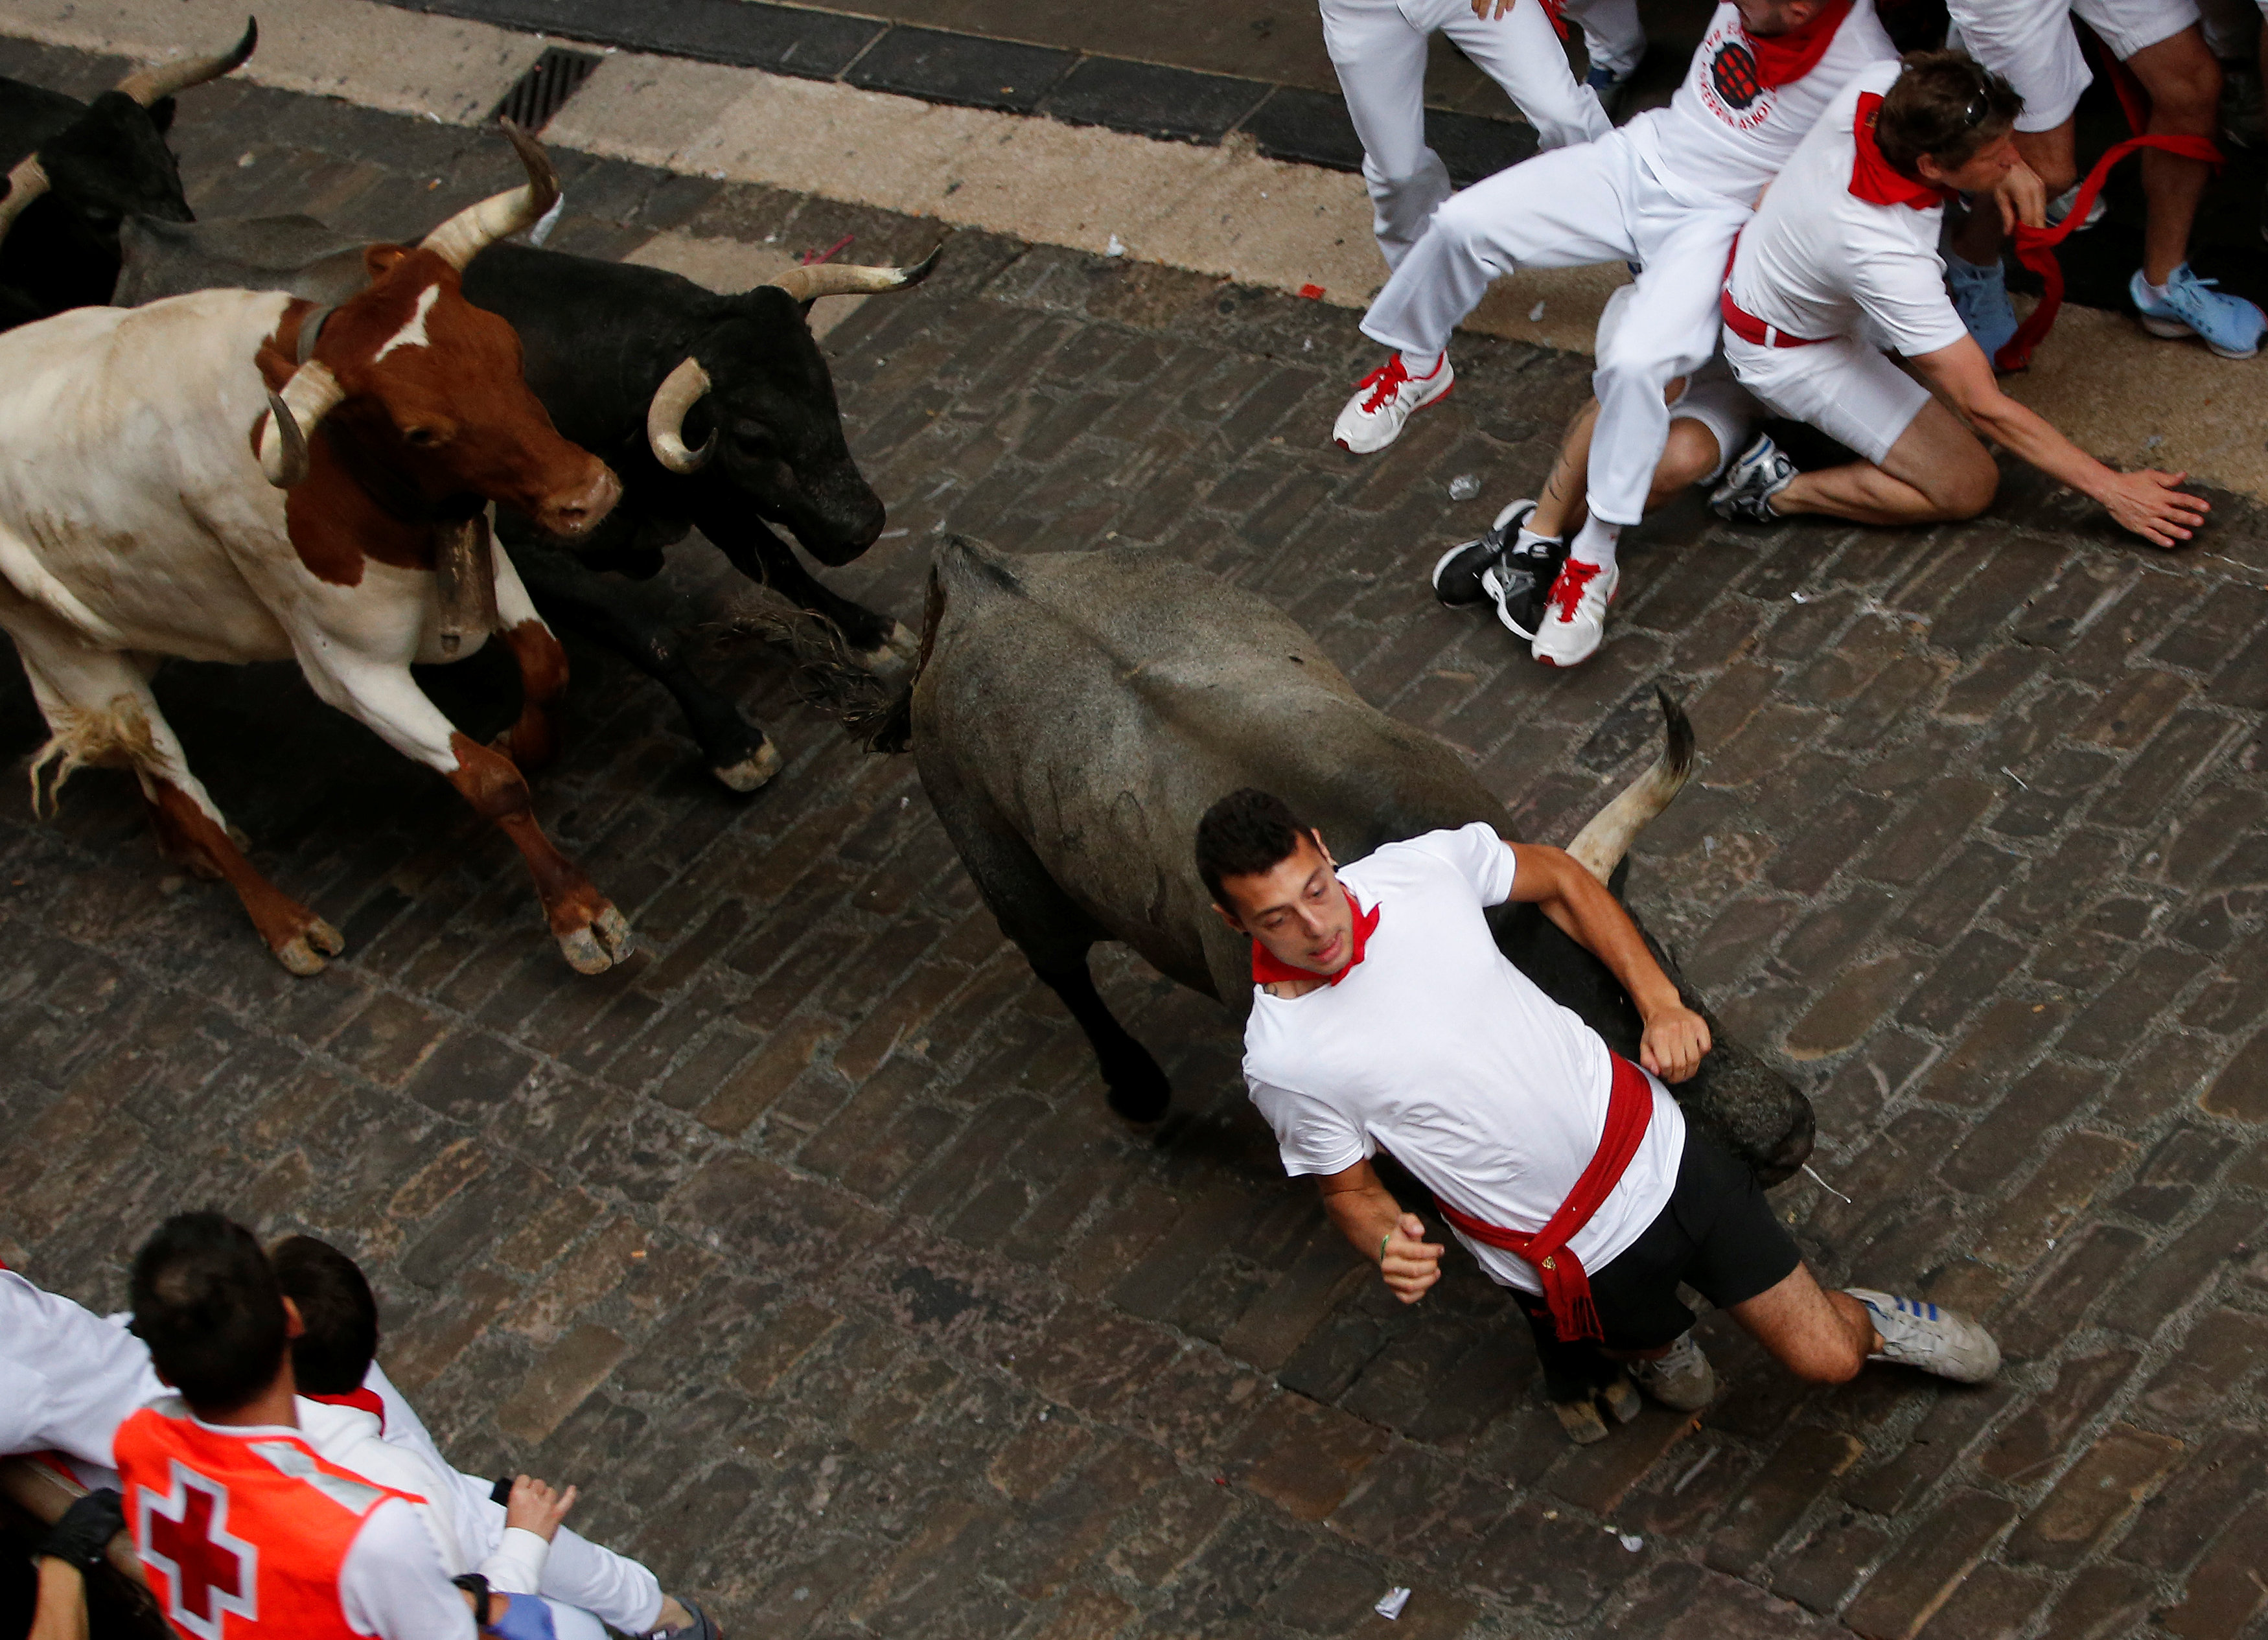 Two people gored on second day of Pamplona bull-run festival